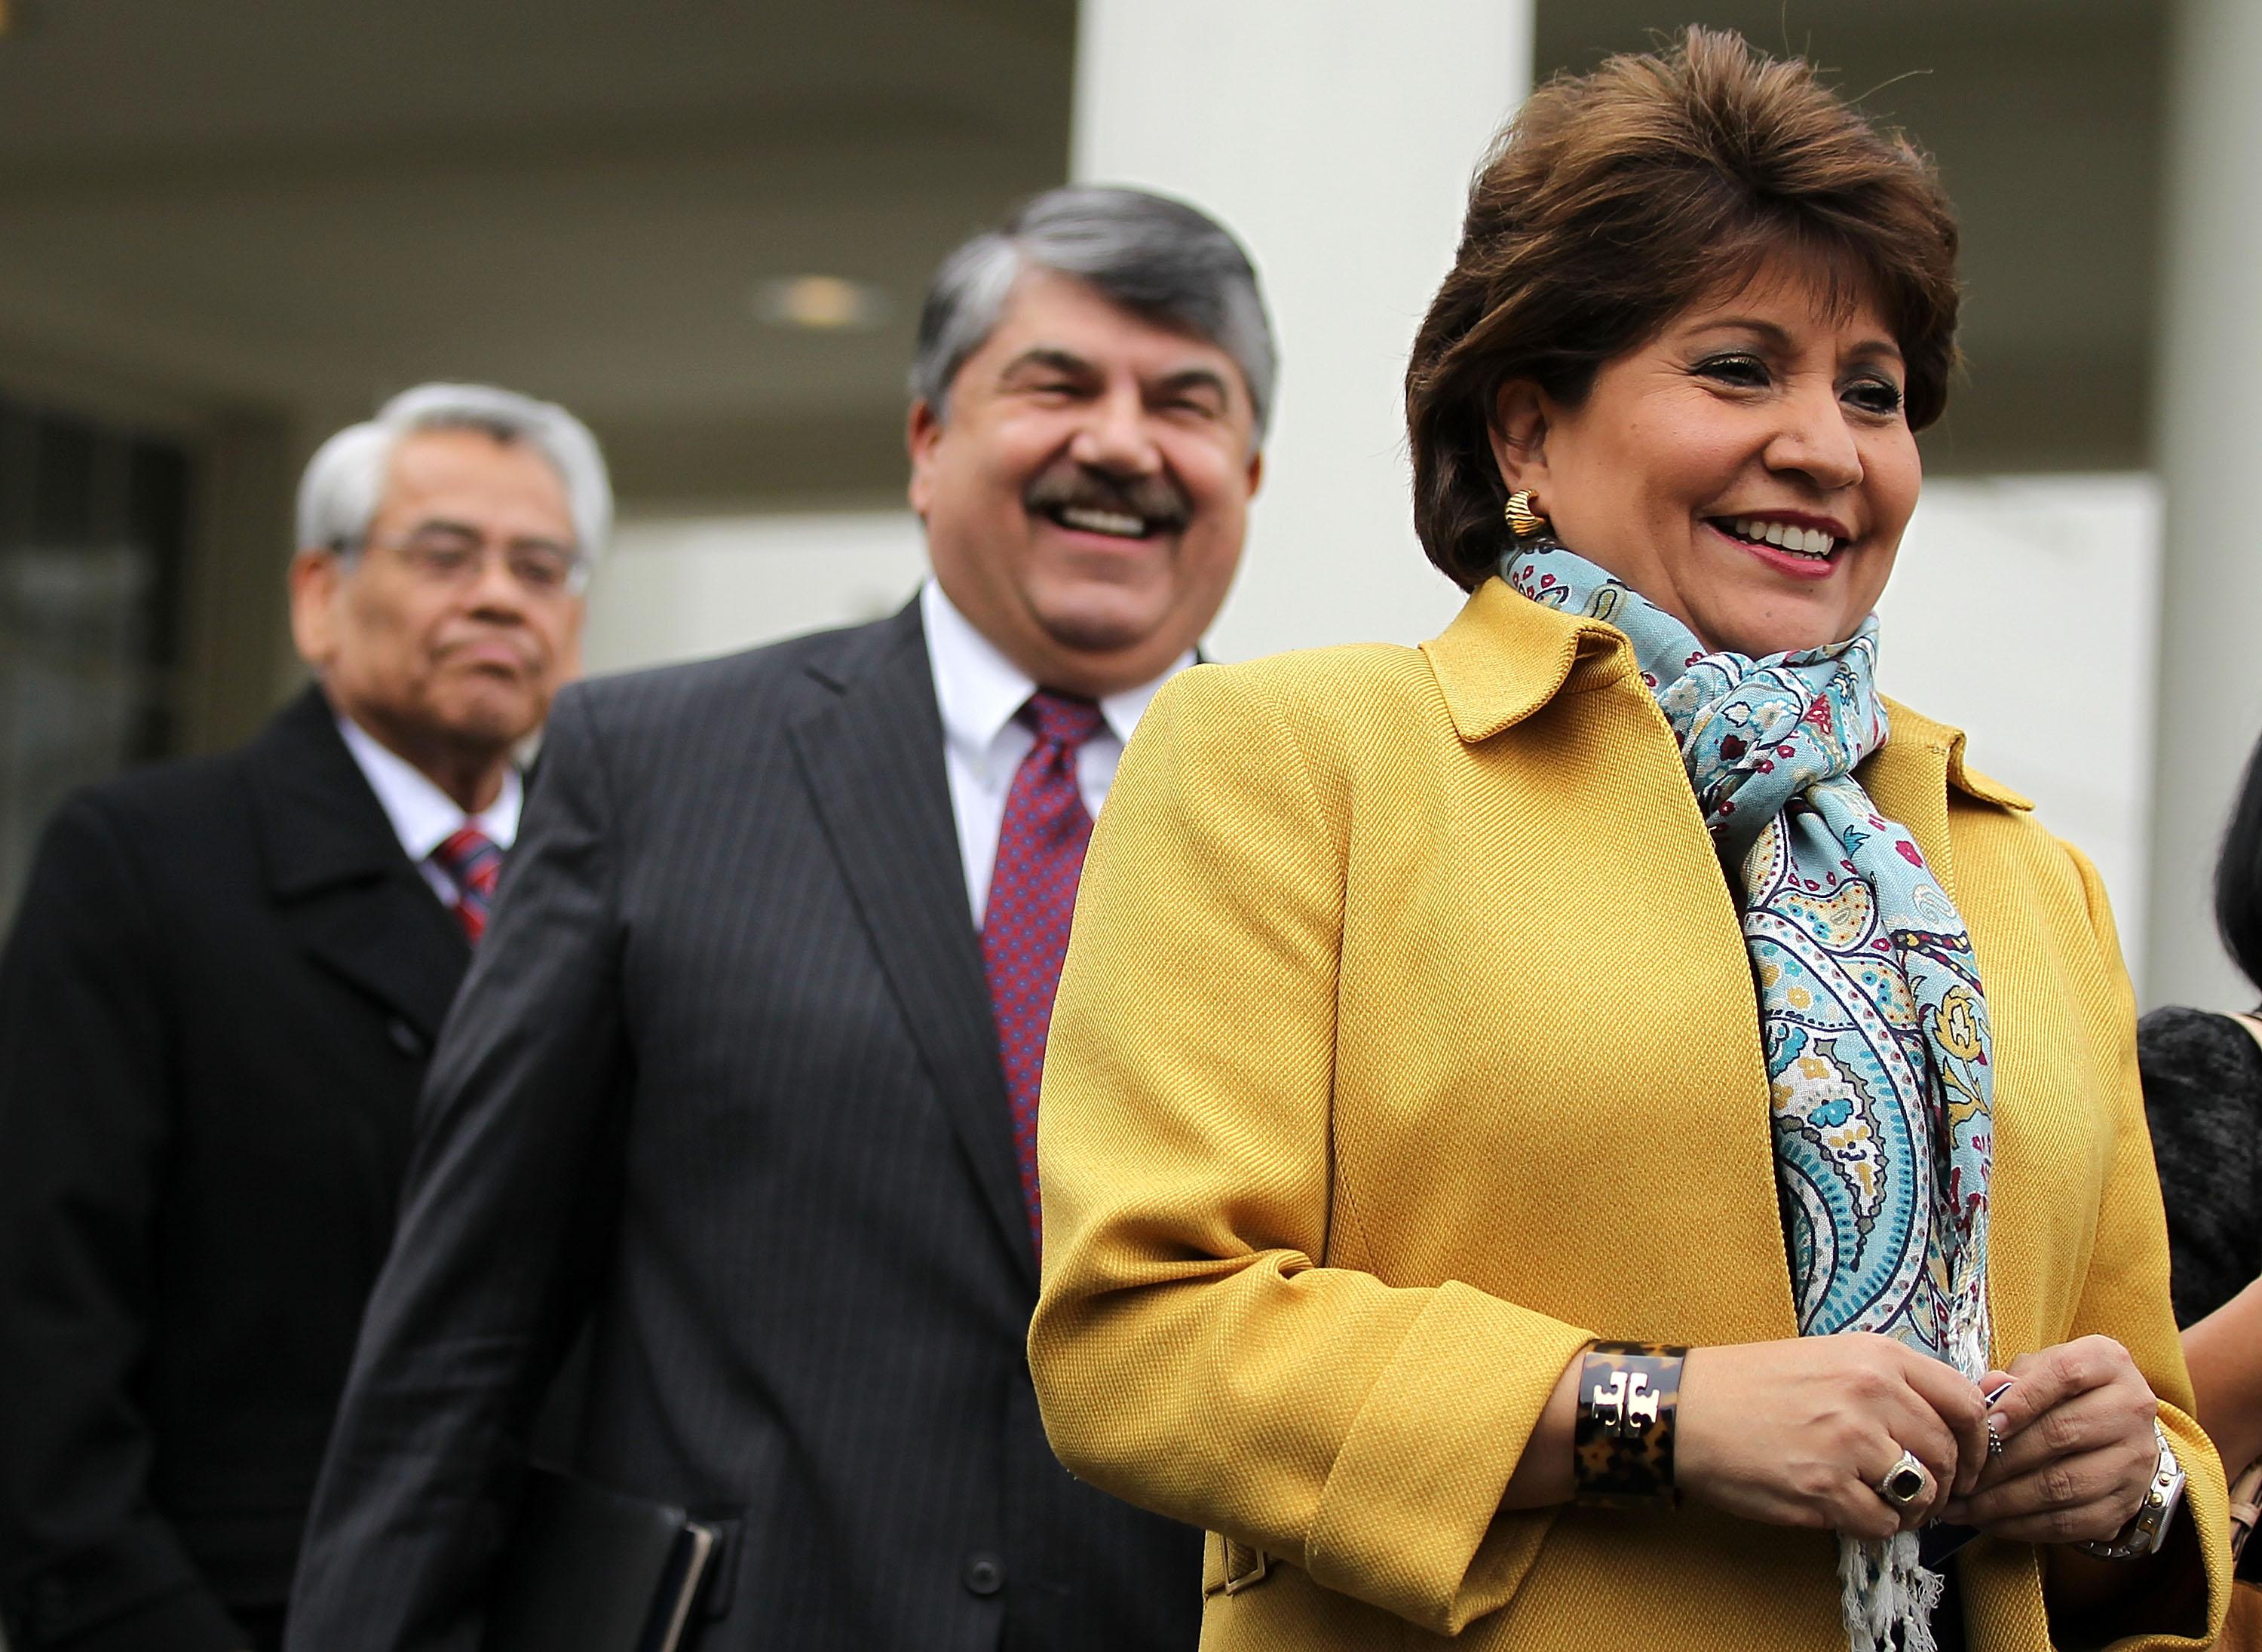 From left: Secretary-Treasurer of SEIU Eliseo Medina, AFL-CIO President Richard Trumka, and President and CEO of National Council of la Raza Janet Murguia come out from the West Wing of the White House after a meeting with President Barack Obama, Feb. 5, 2013, in Washington, D.C.